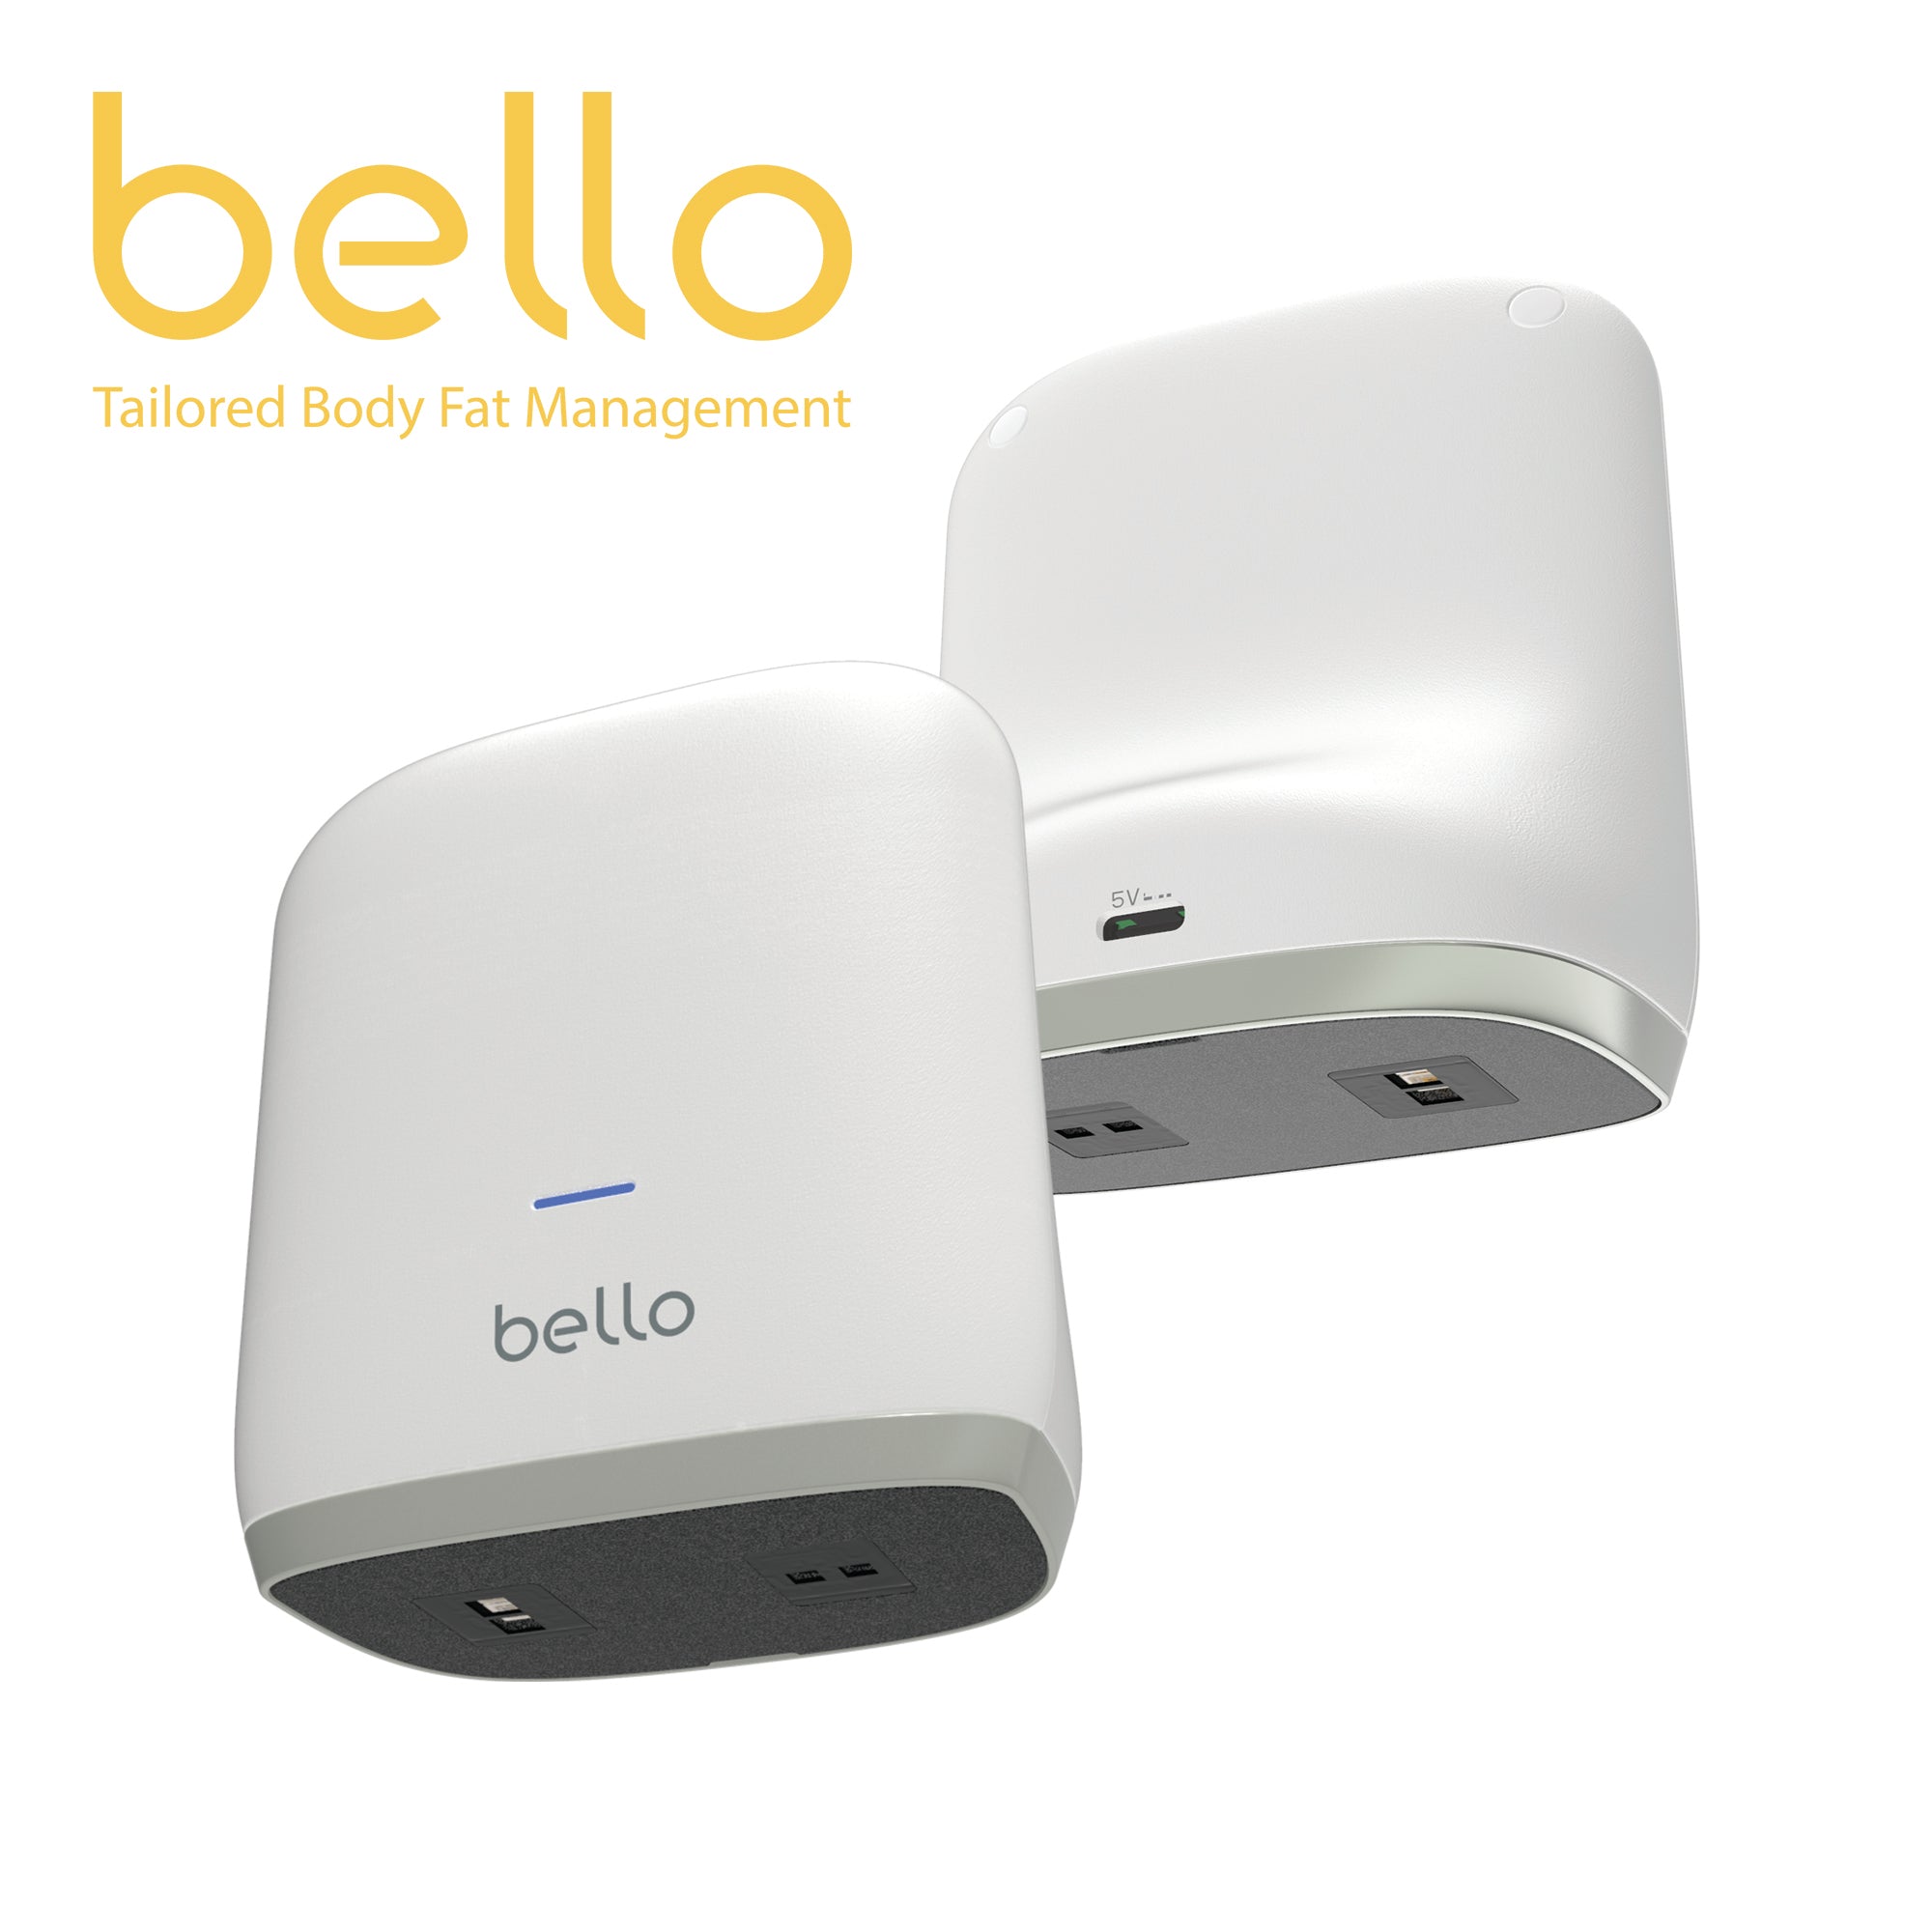 Bello 2 - Tailored Body Fat Management